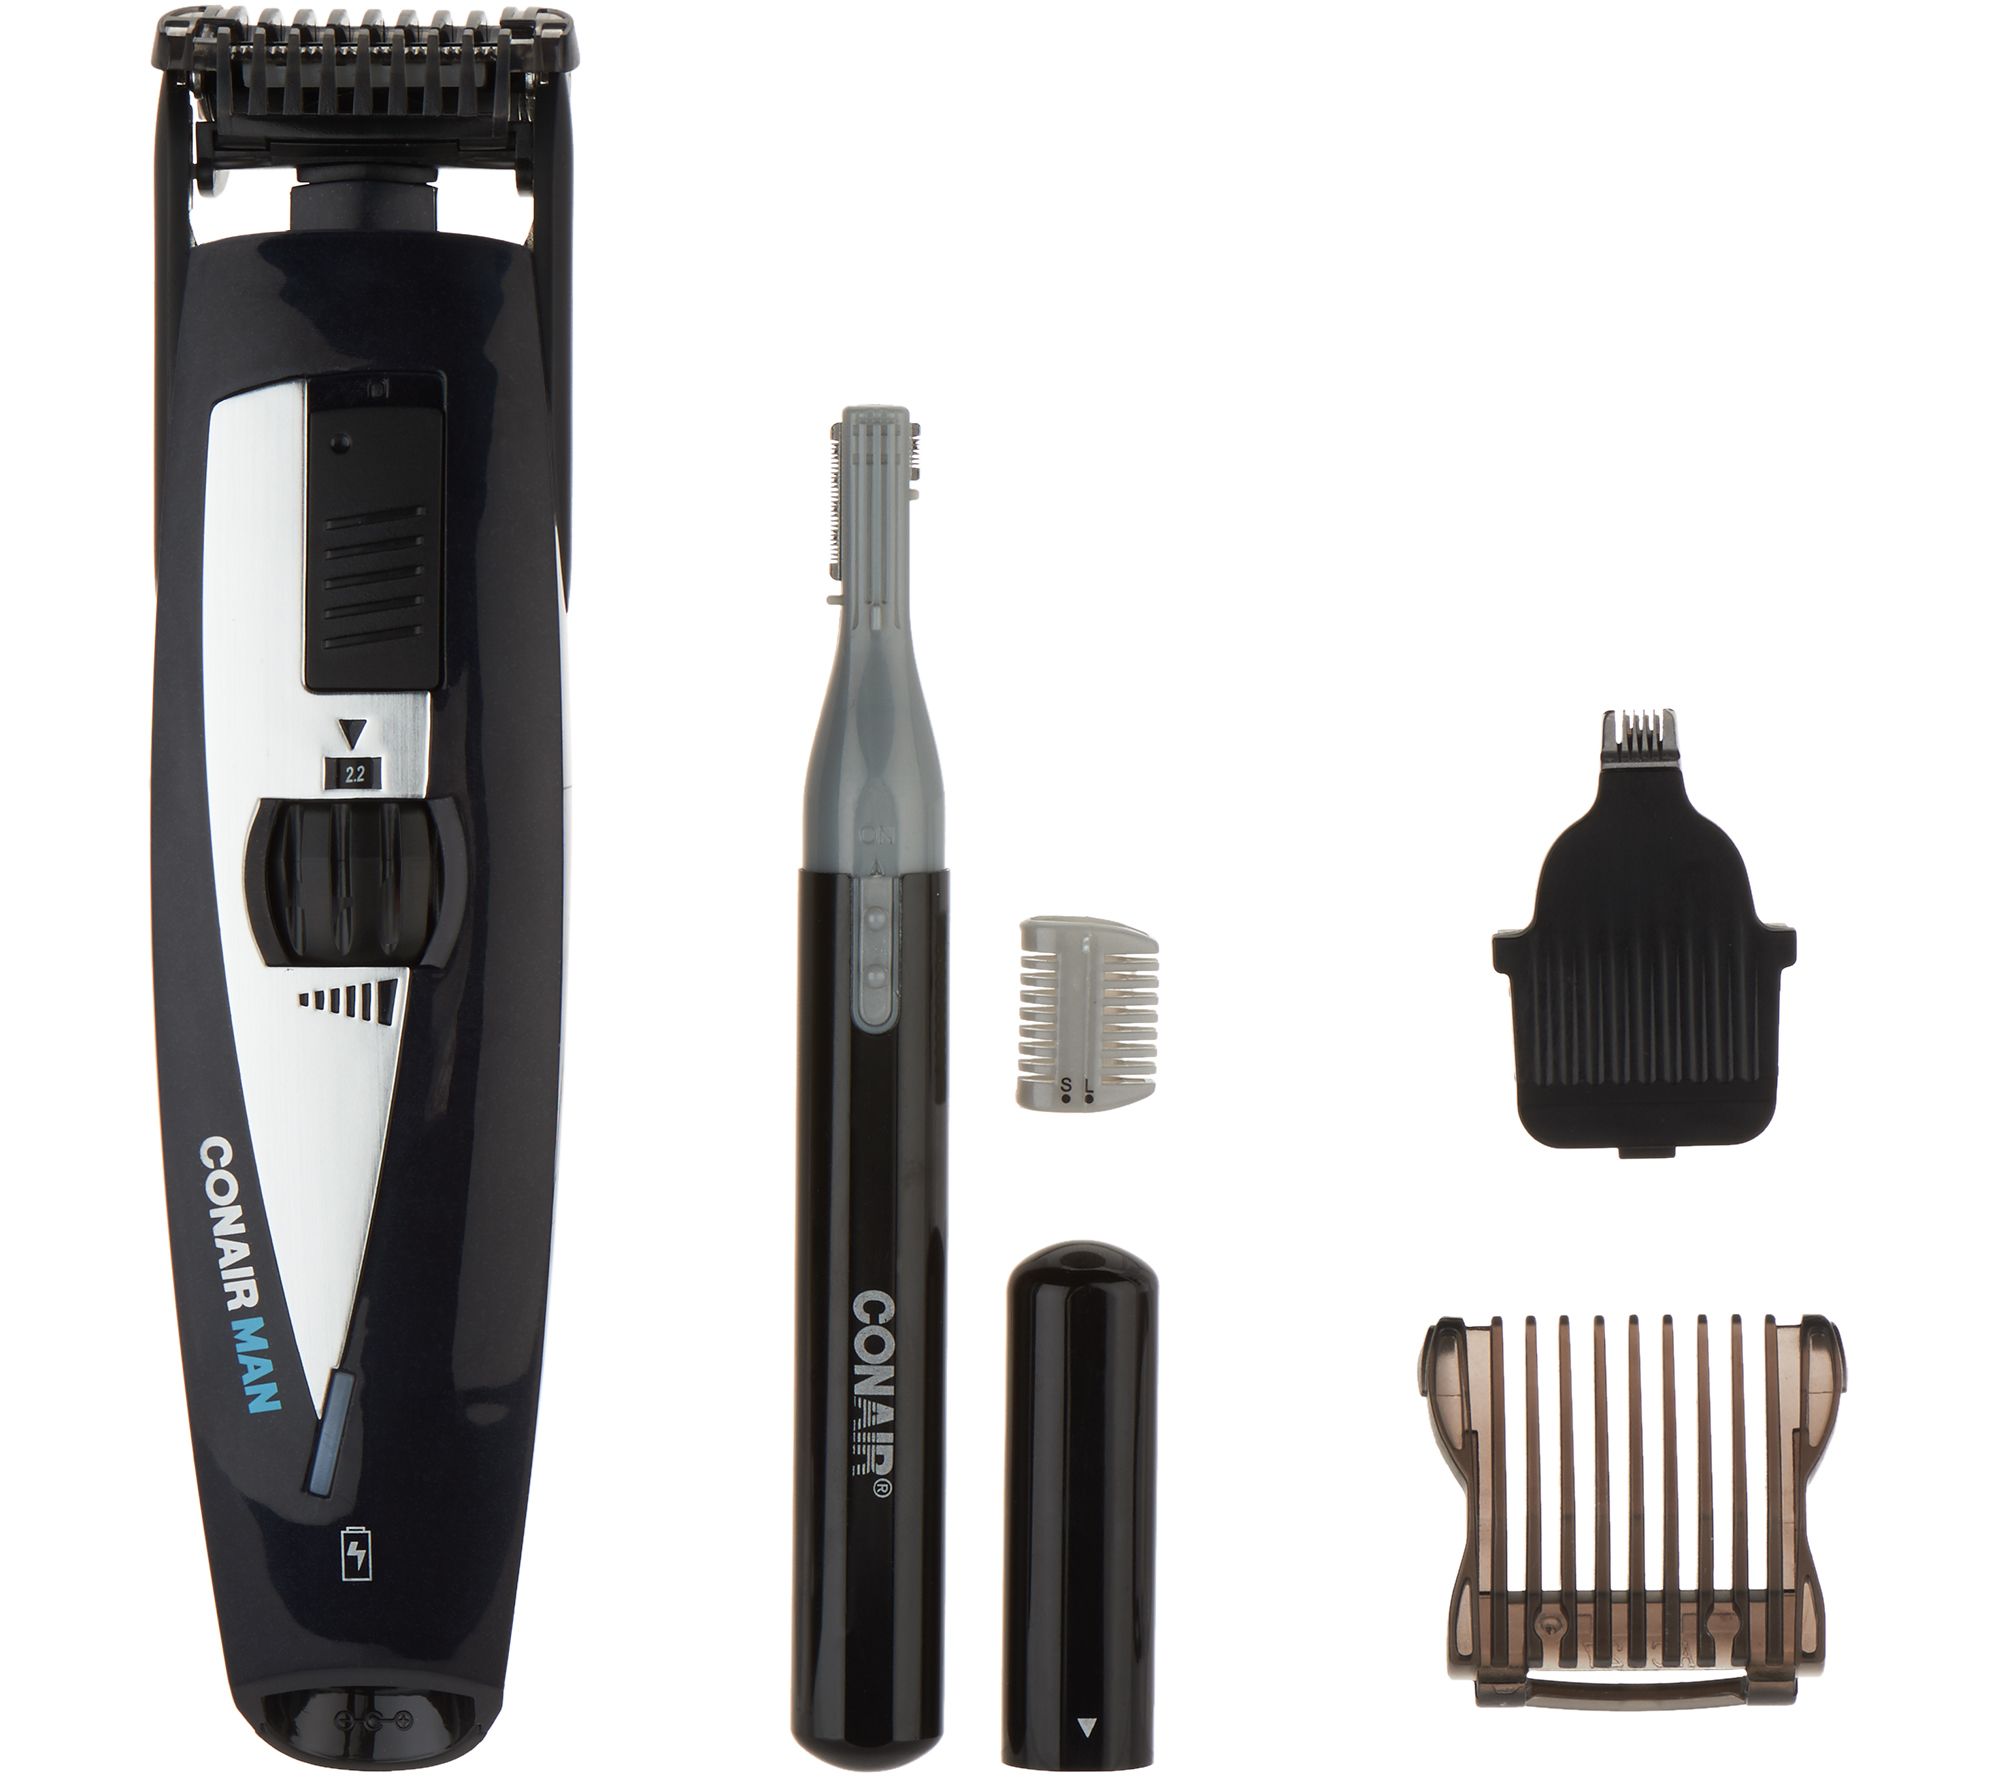 conair rechargeable trimmer